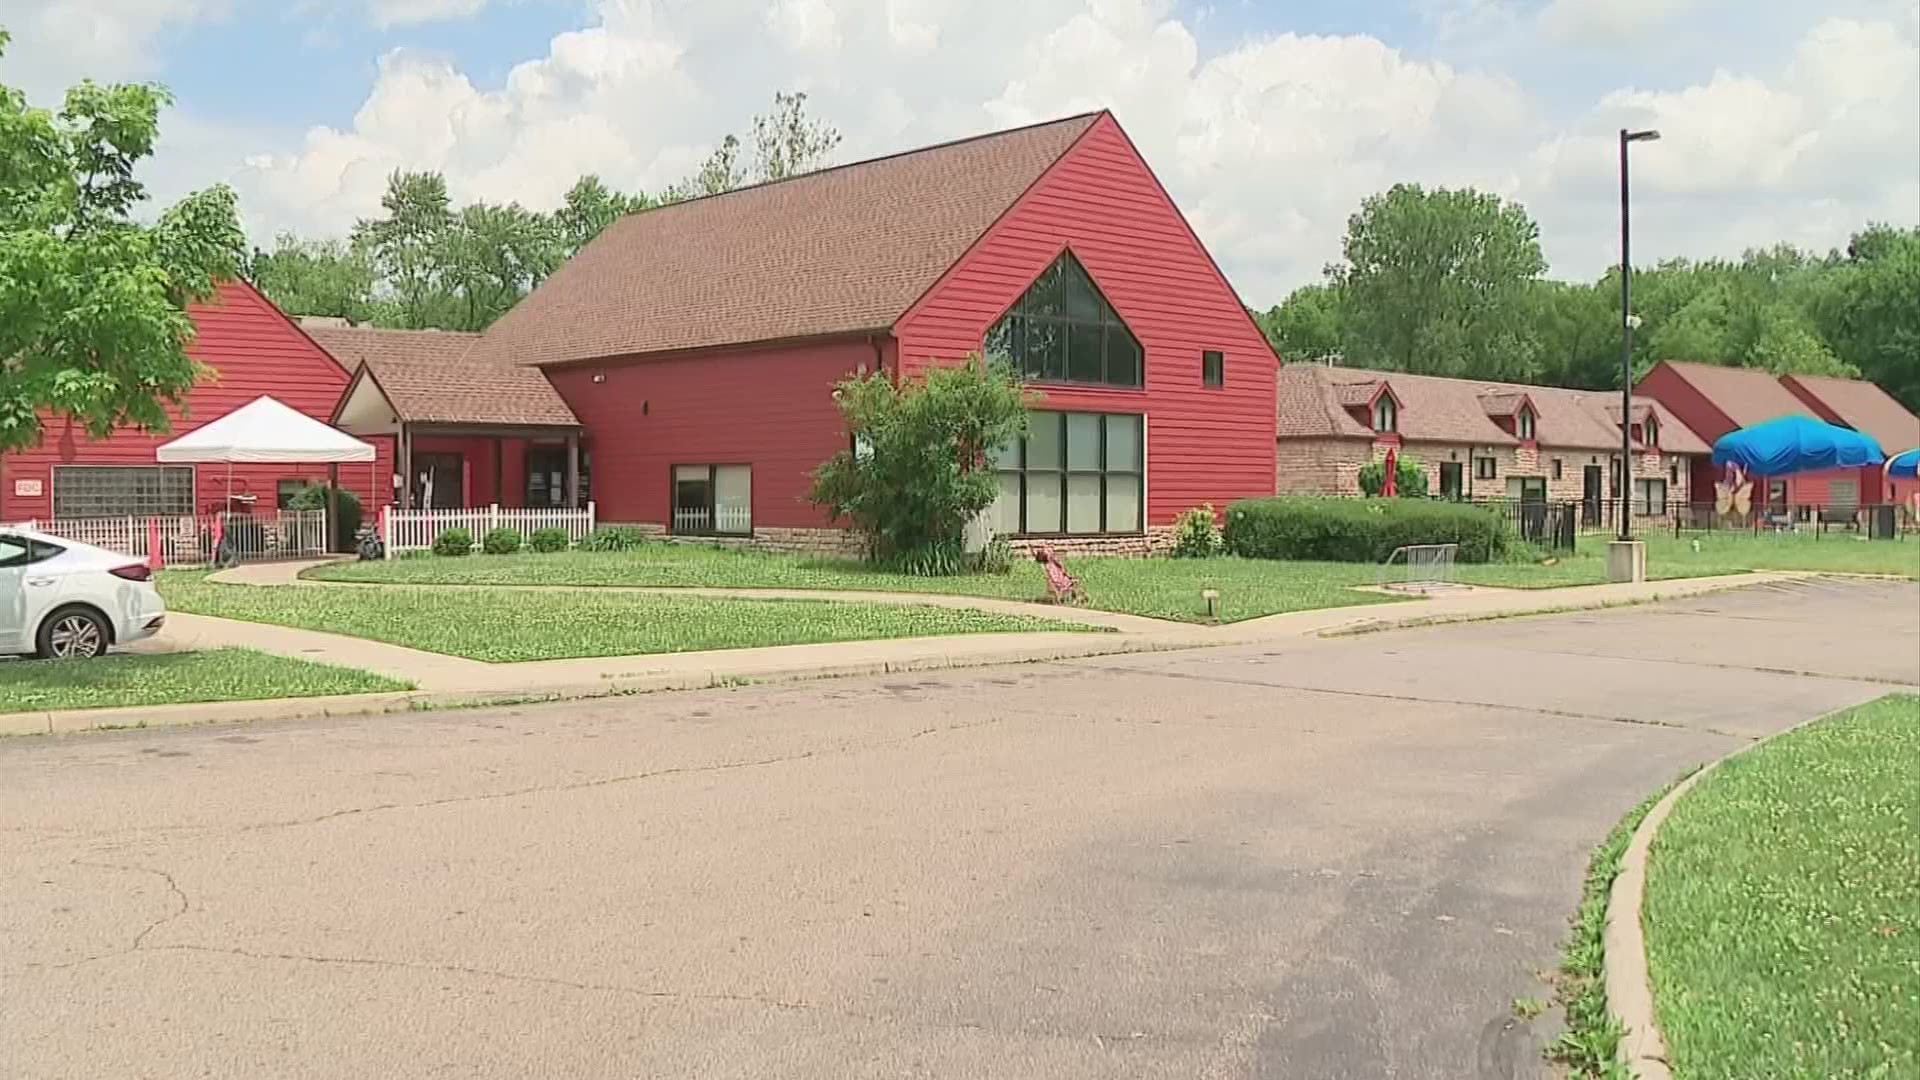 Ohio has a publicly funded child care program that pays the costs for families who can't afford it. A state lawmaker is looking to get rid of the program.